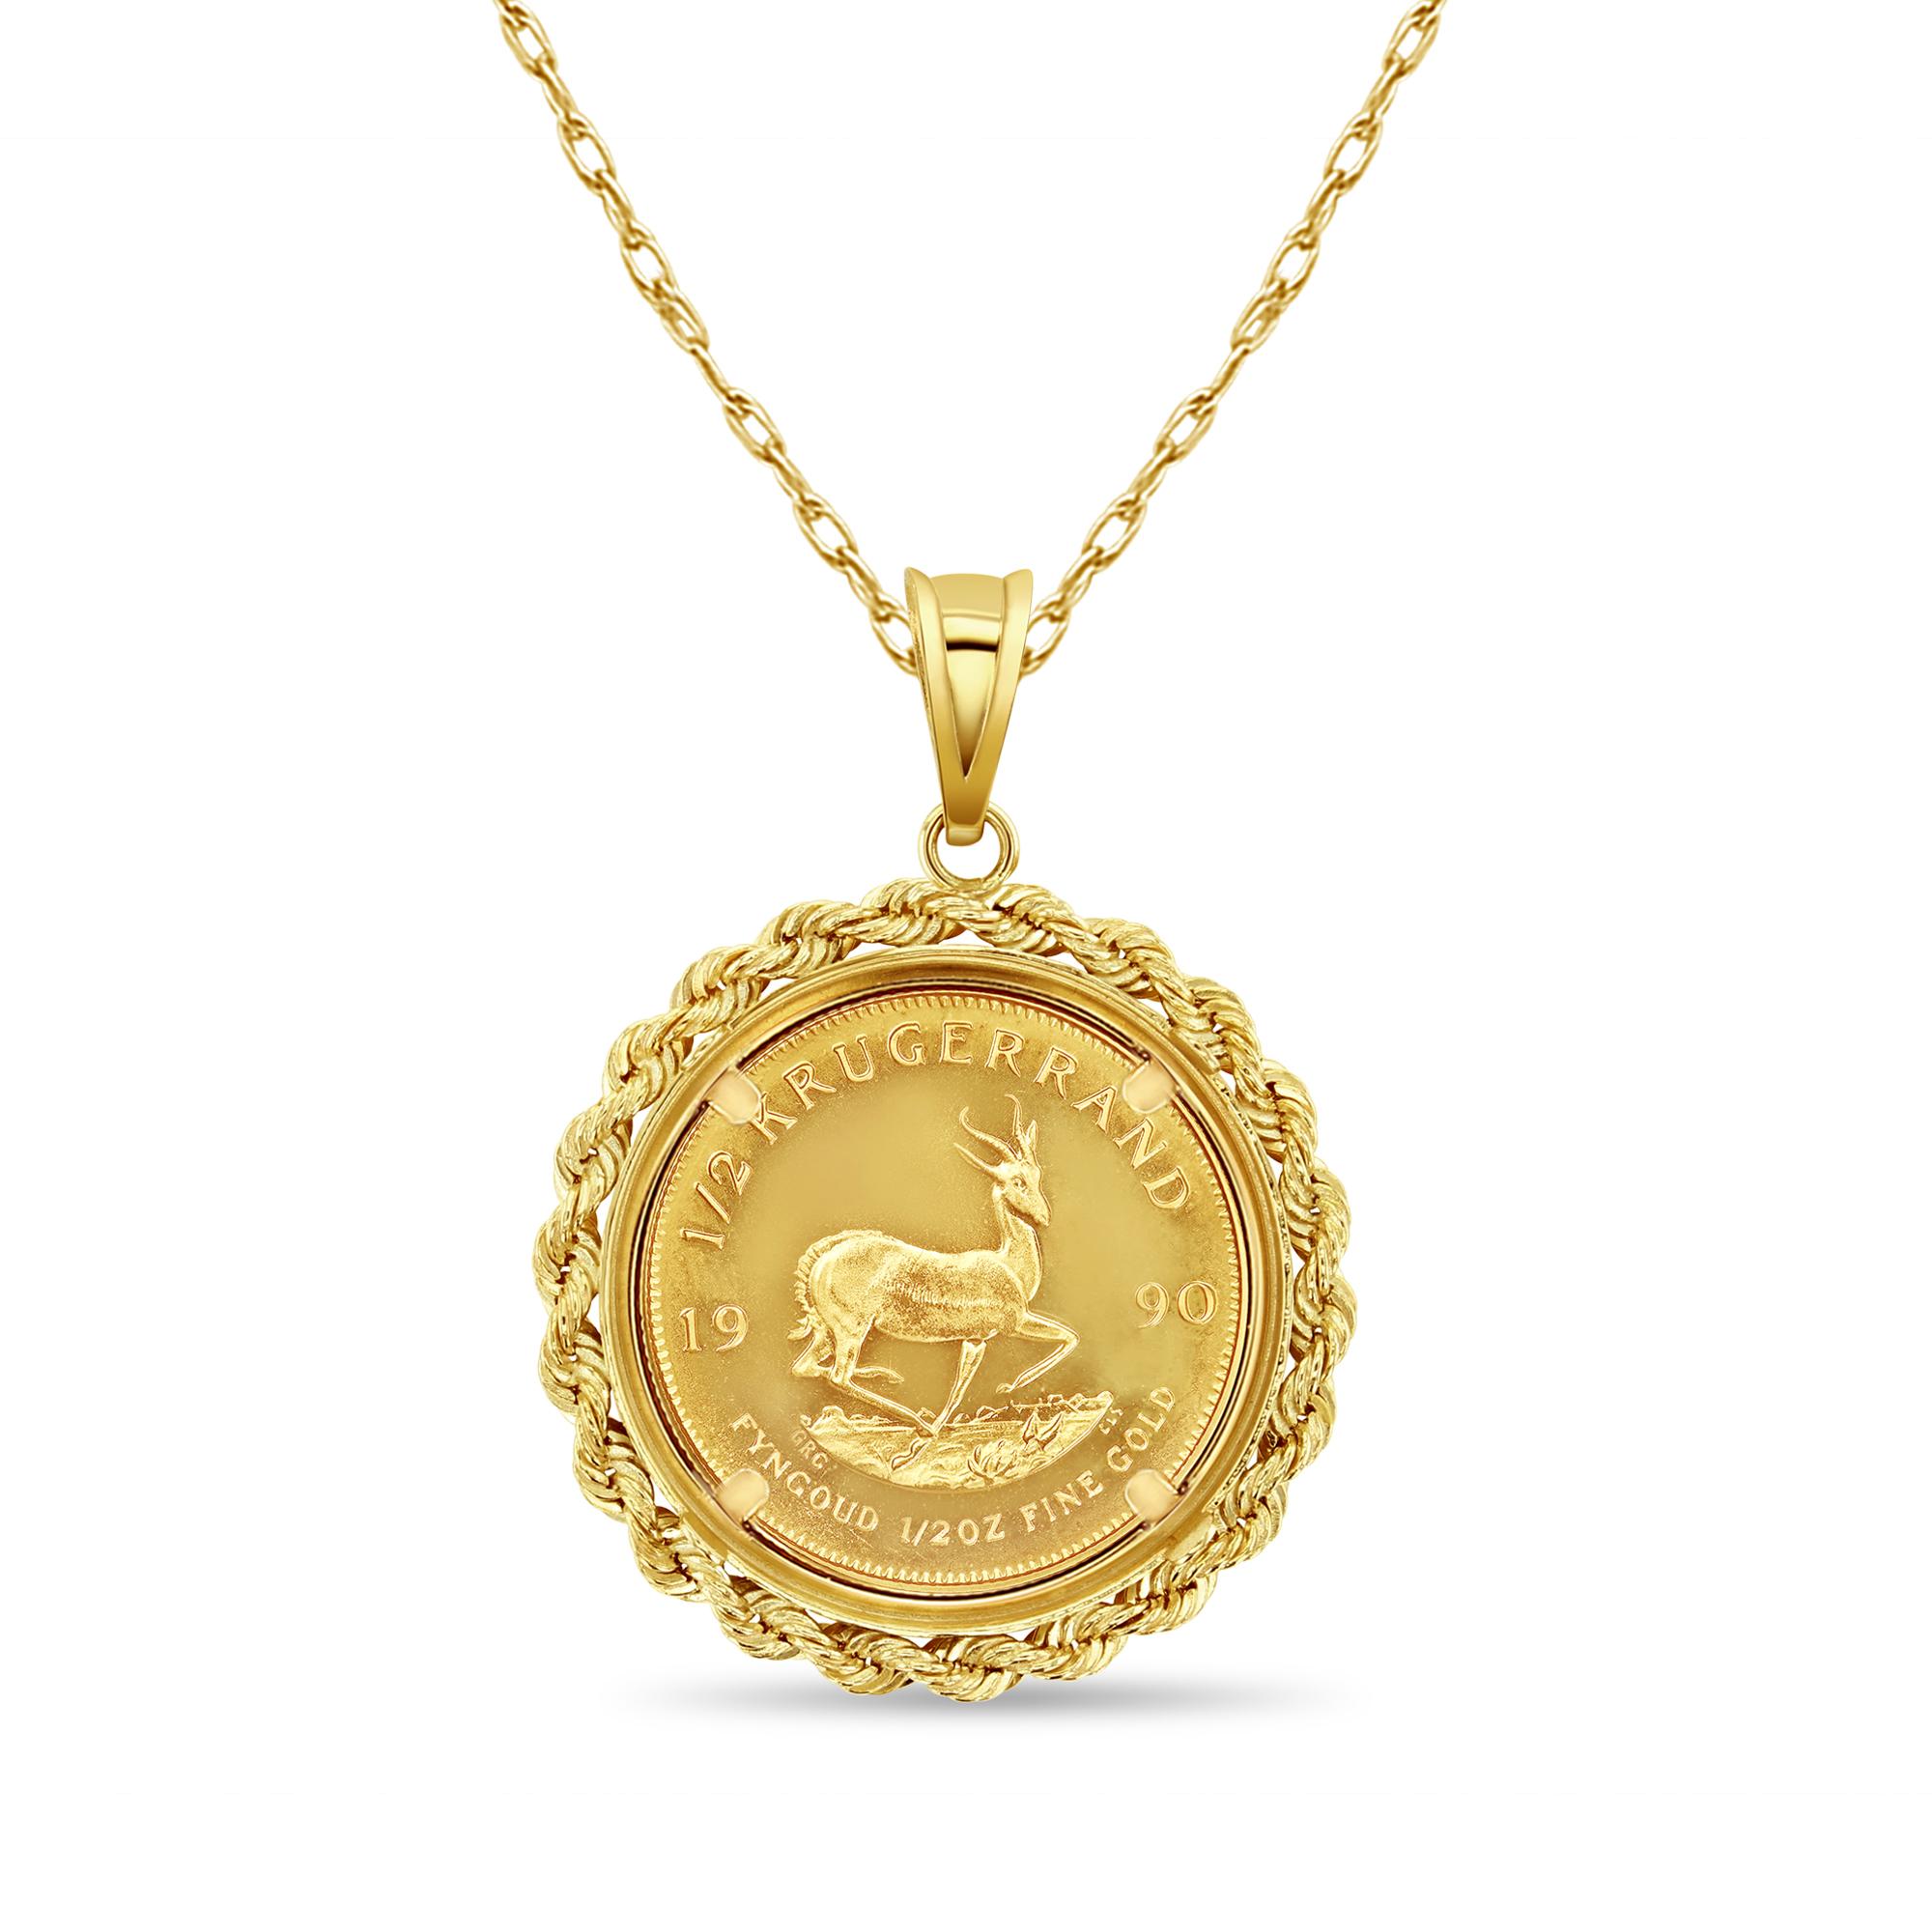 ♥ Coin Information  ♥ 

Details: South African Krugerrand Gold Coin
Composition: .9167 Gold Ounce
Precious Metal Content: 1/2OZ
Year: Varies
Diameter: 27mm
Obverse: Paul Kruger
Reverse: Antelope

 ♥ Bezel Information  ♥ 

Style: Rope Bezel
Halo